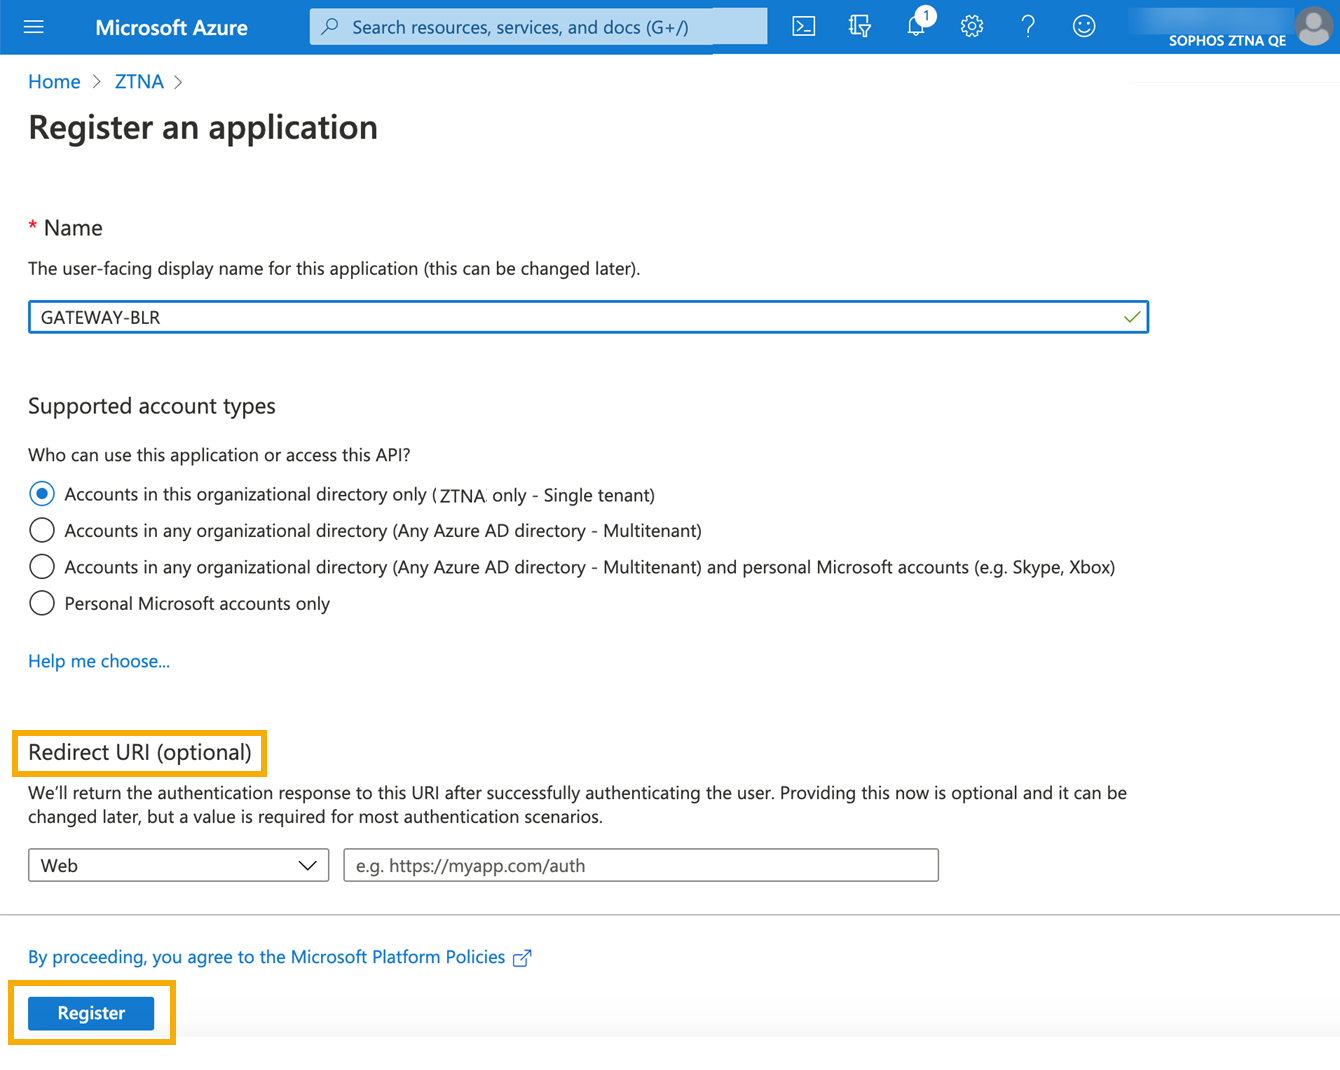 Register an application page in Azure AD